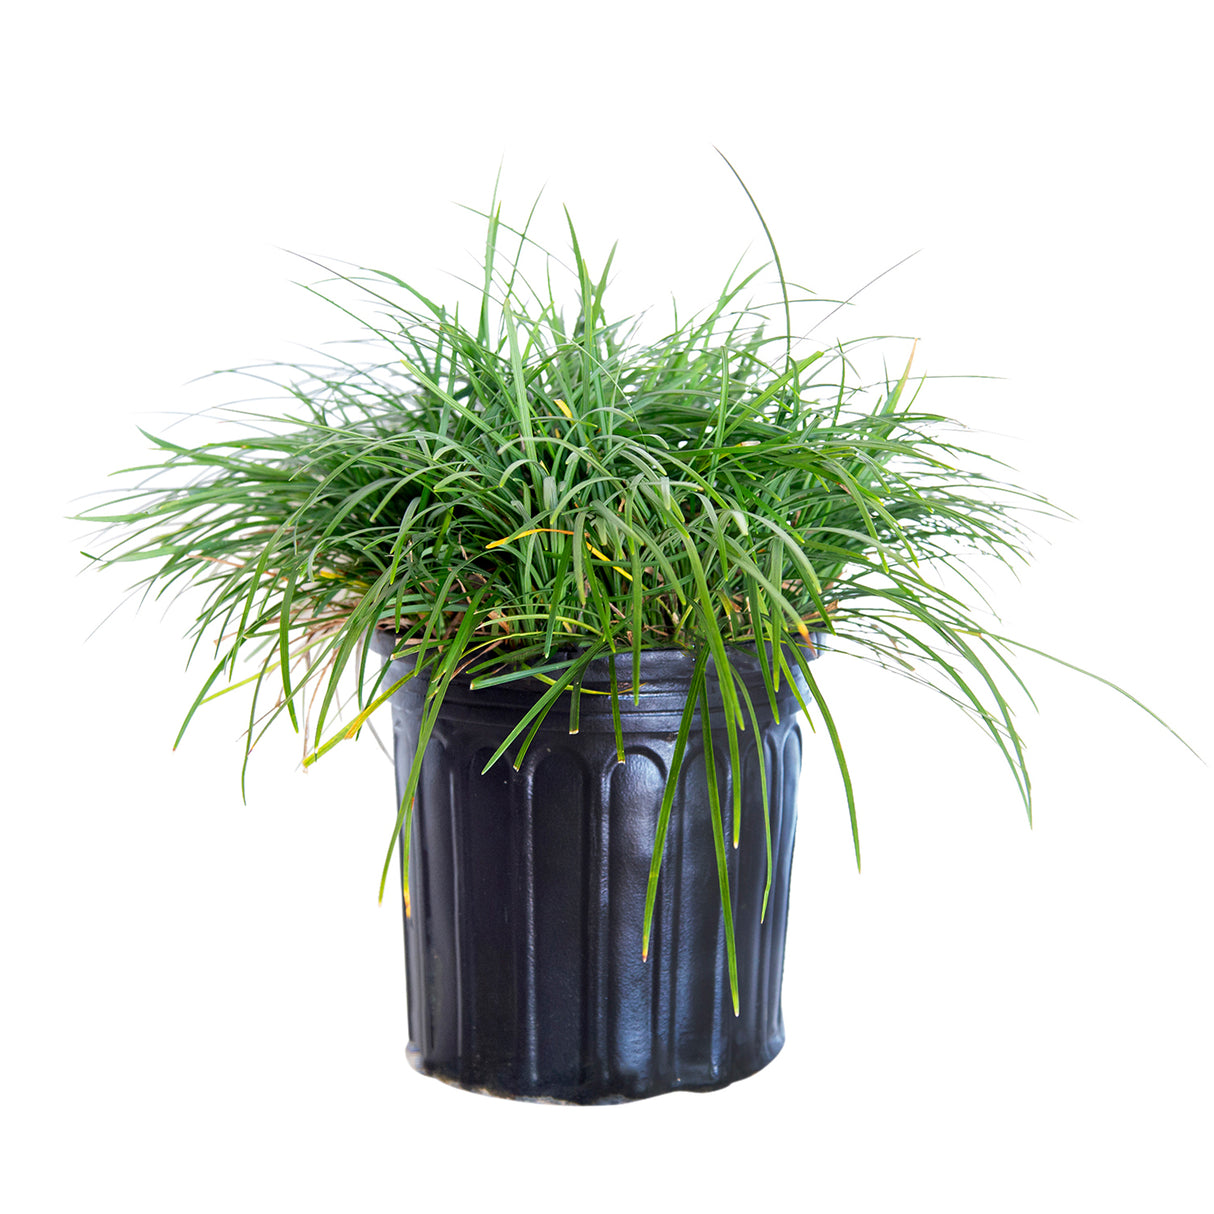 2.5 Quart Mondo Grass for sale with strappy green foliage in a black nursery pot on a white background